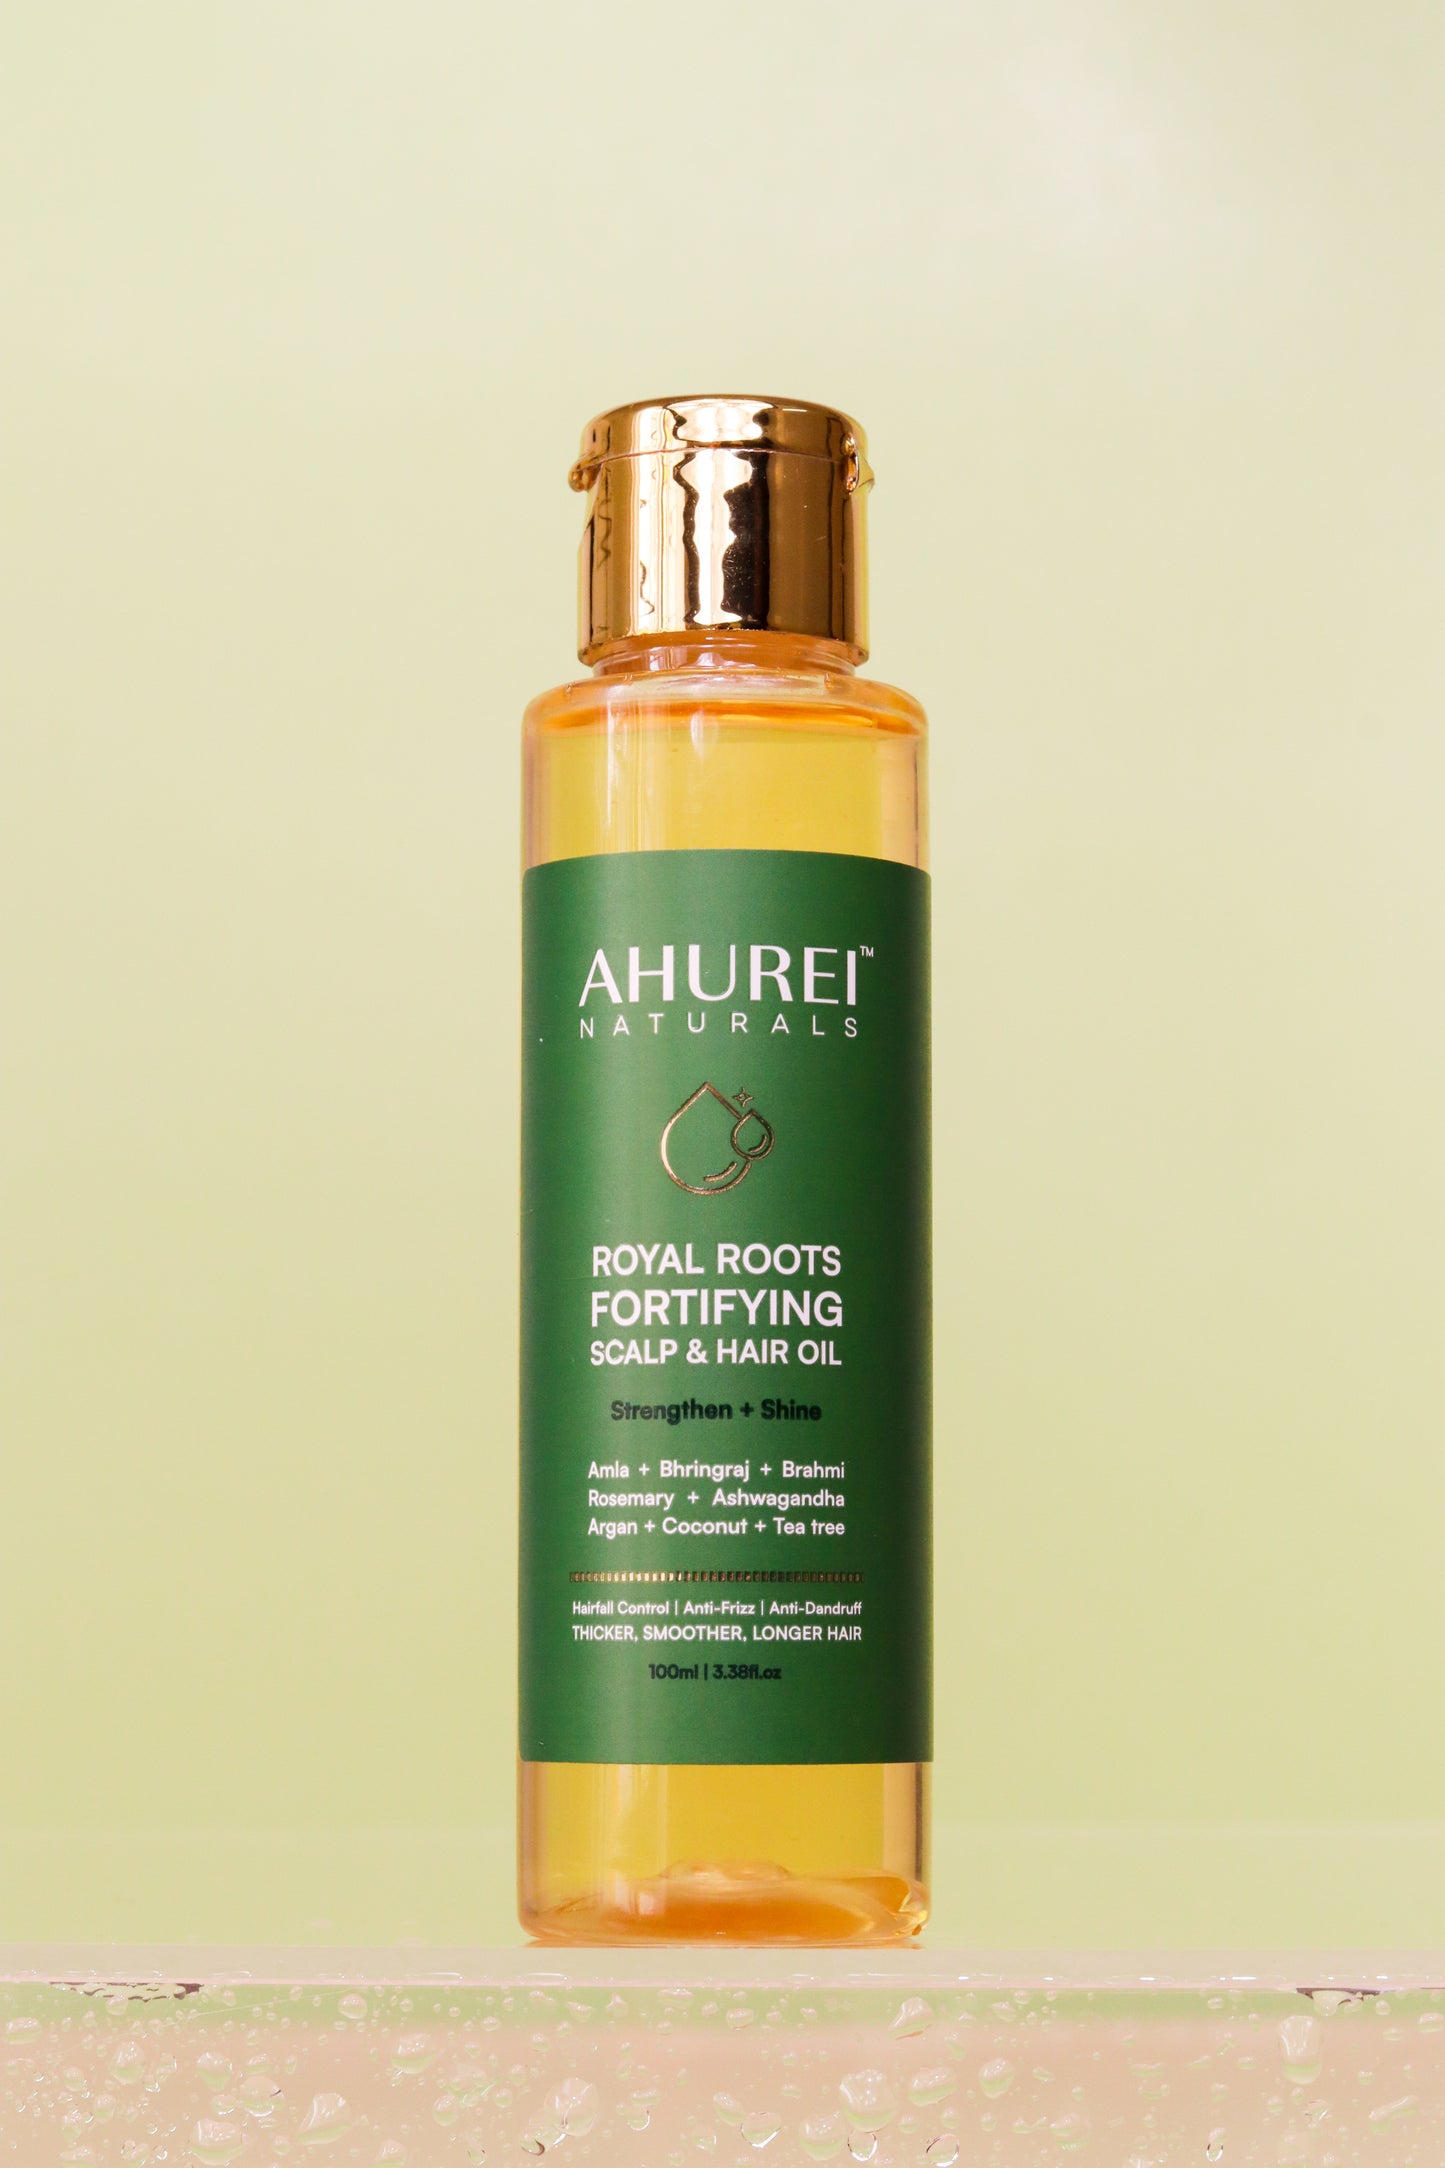 ROYAL ROOTS FORTIFYING SCALP & HAIR OIL